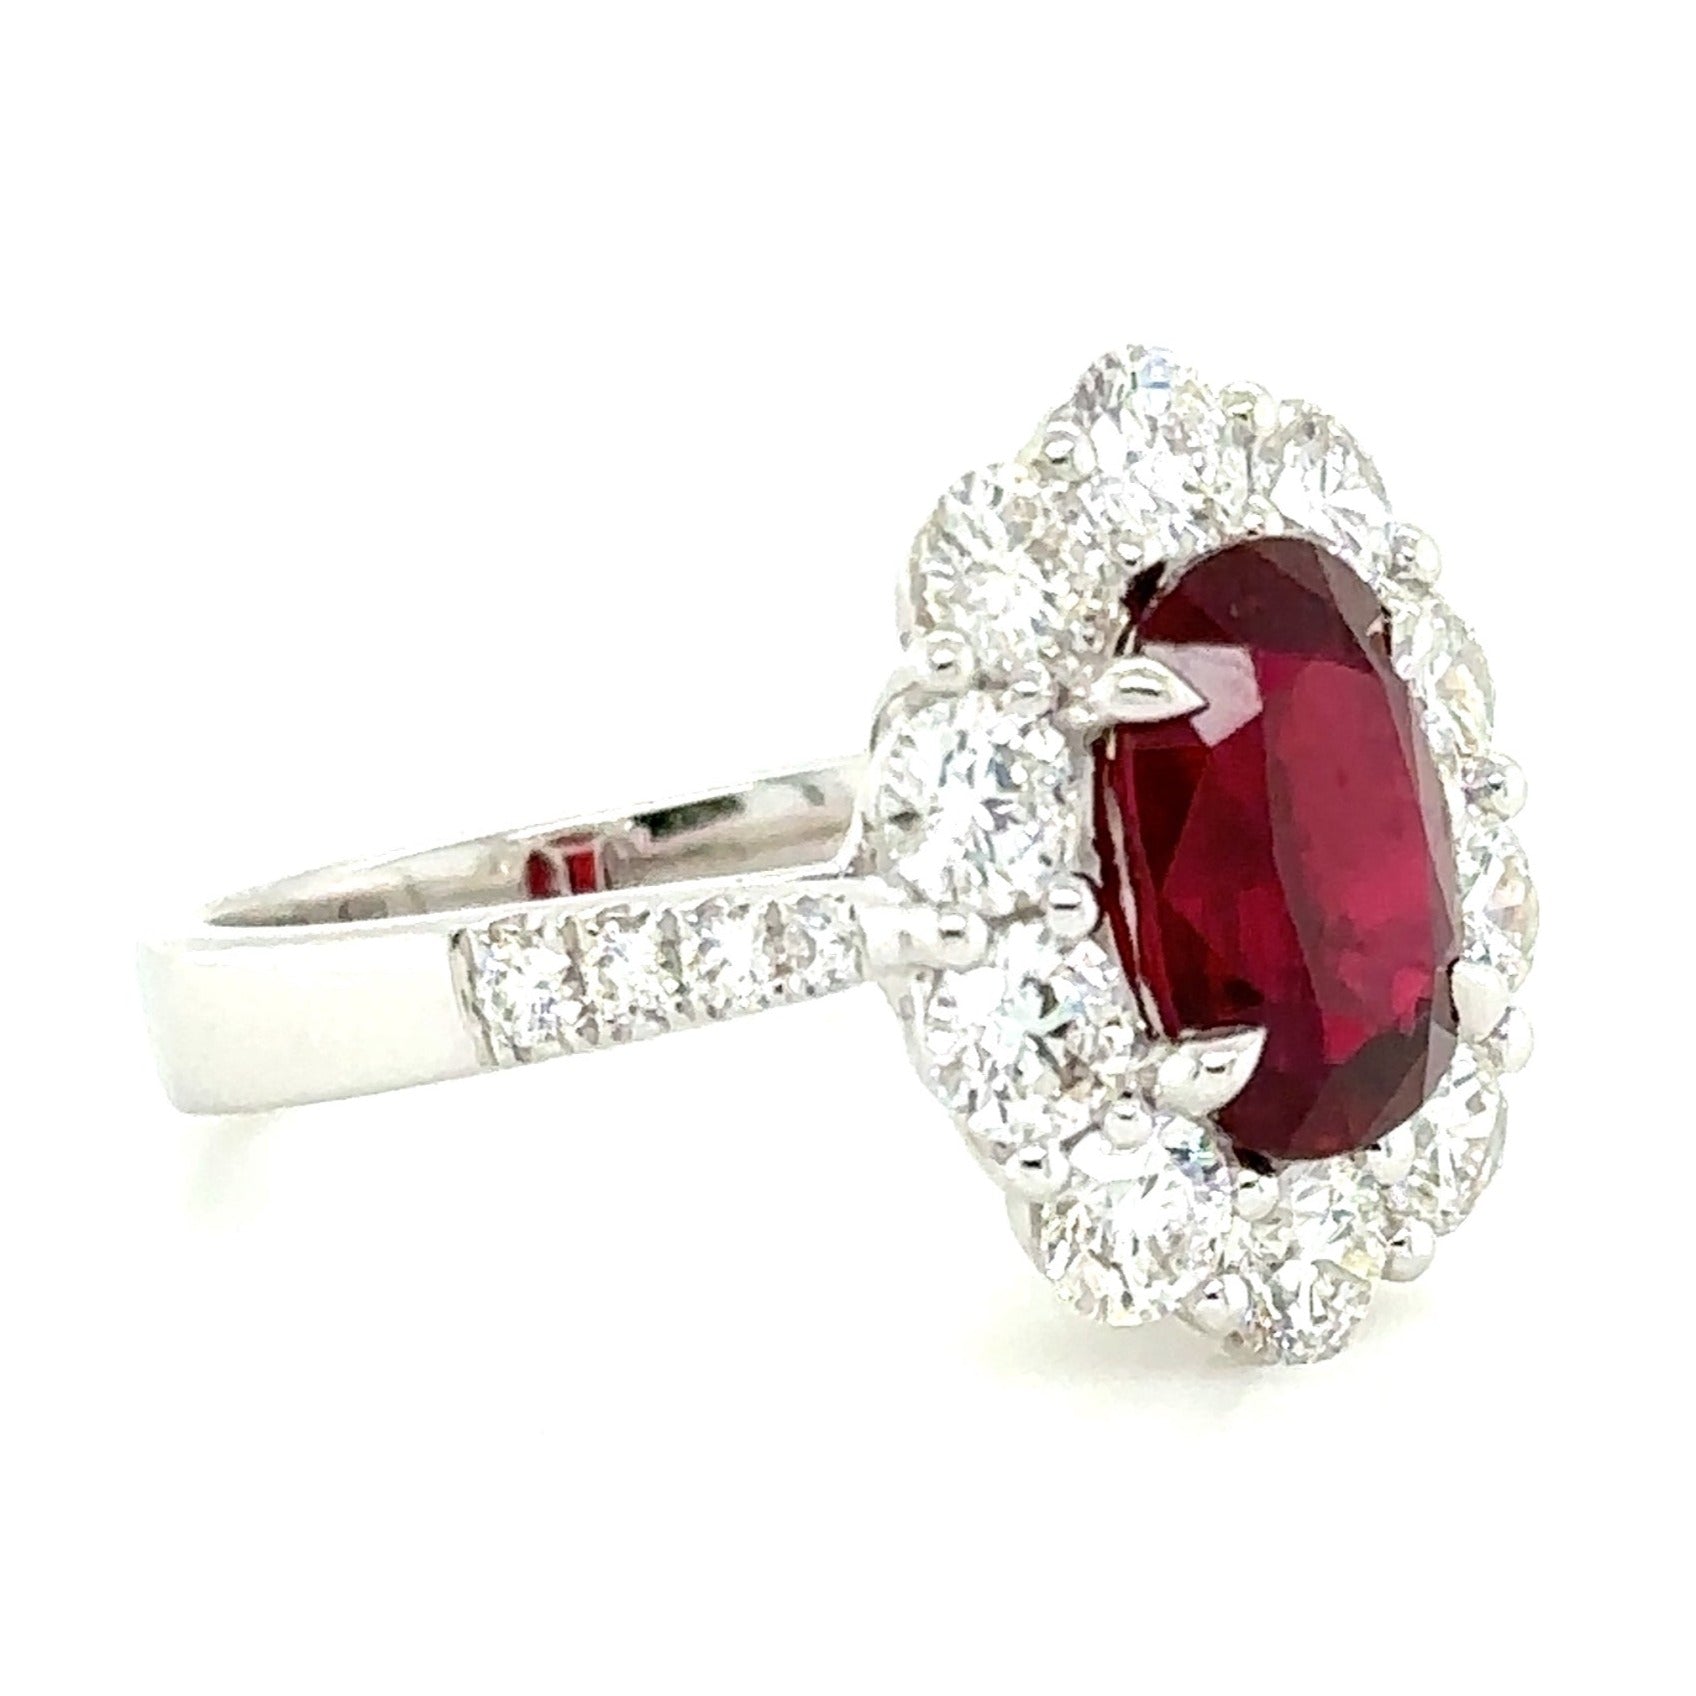 Ladies Statement 5.29ct tw Oval Pigeon Blood Red Ruby & Diamond Ring